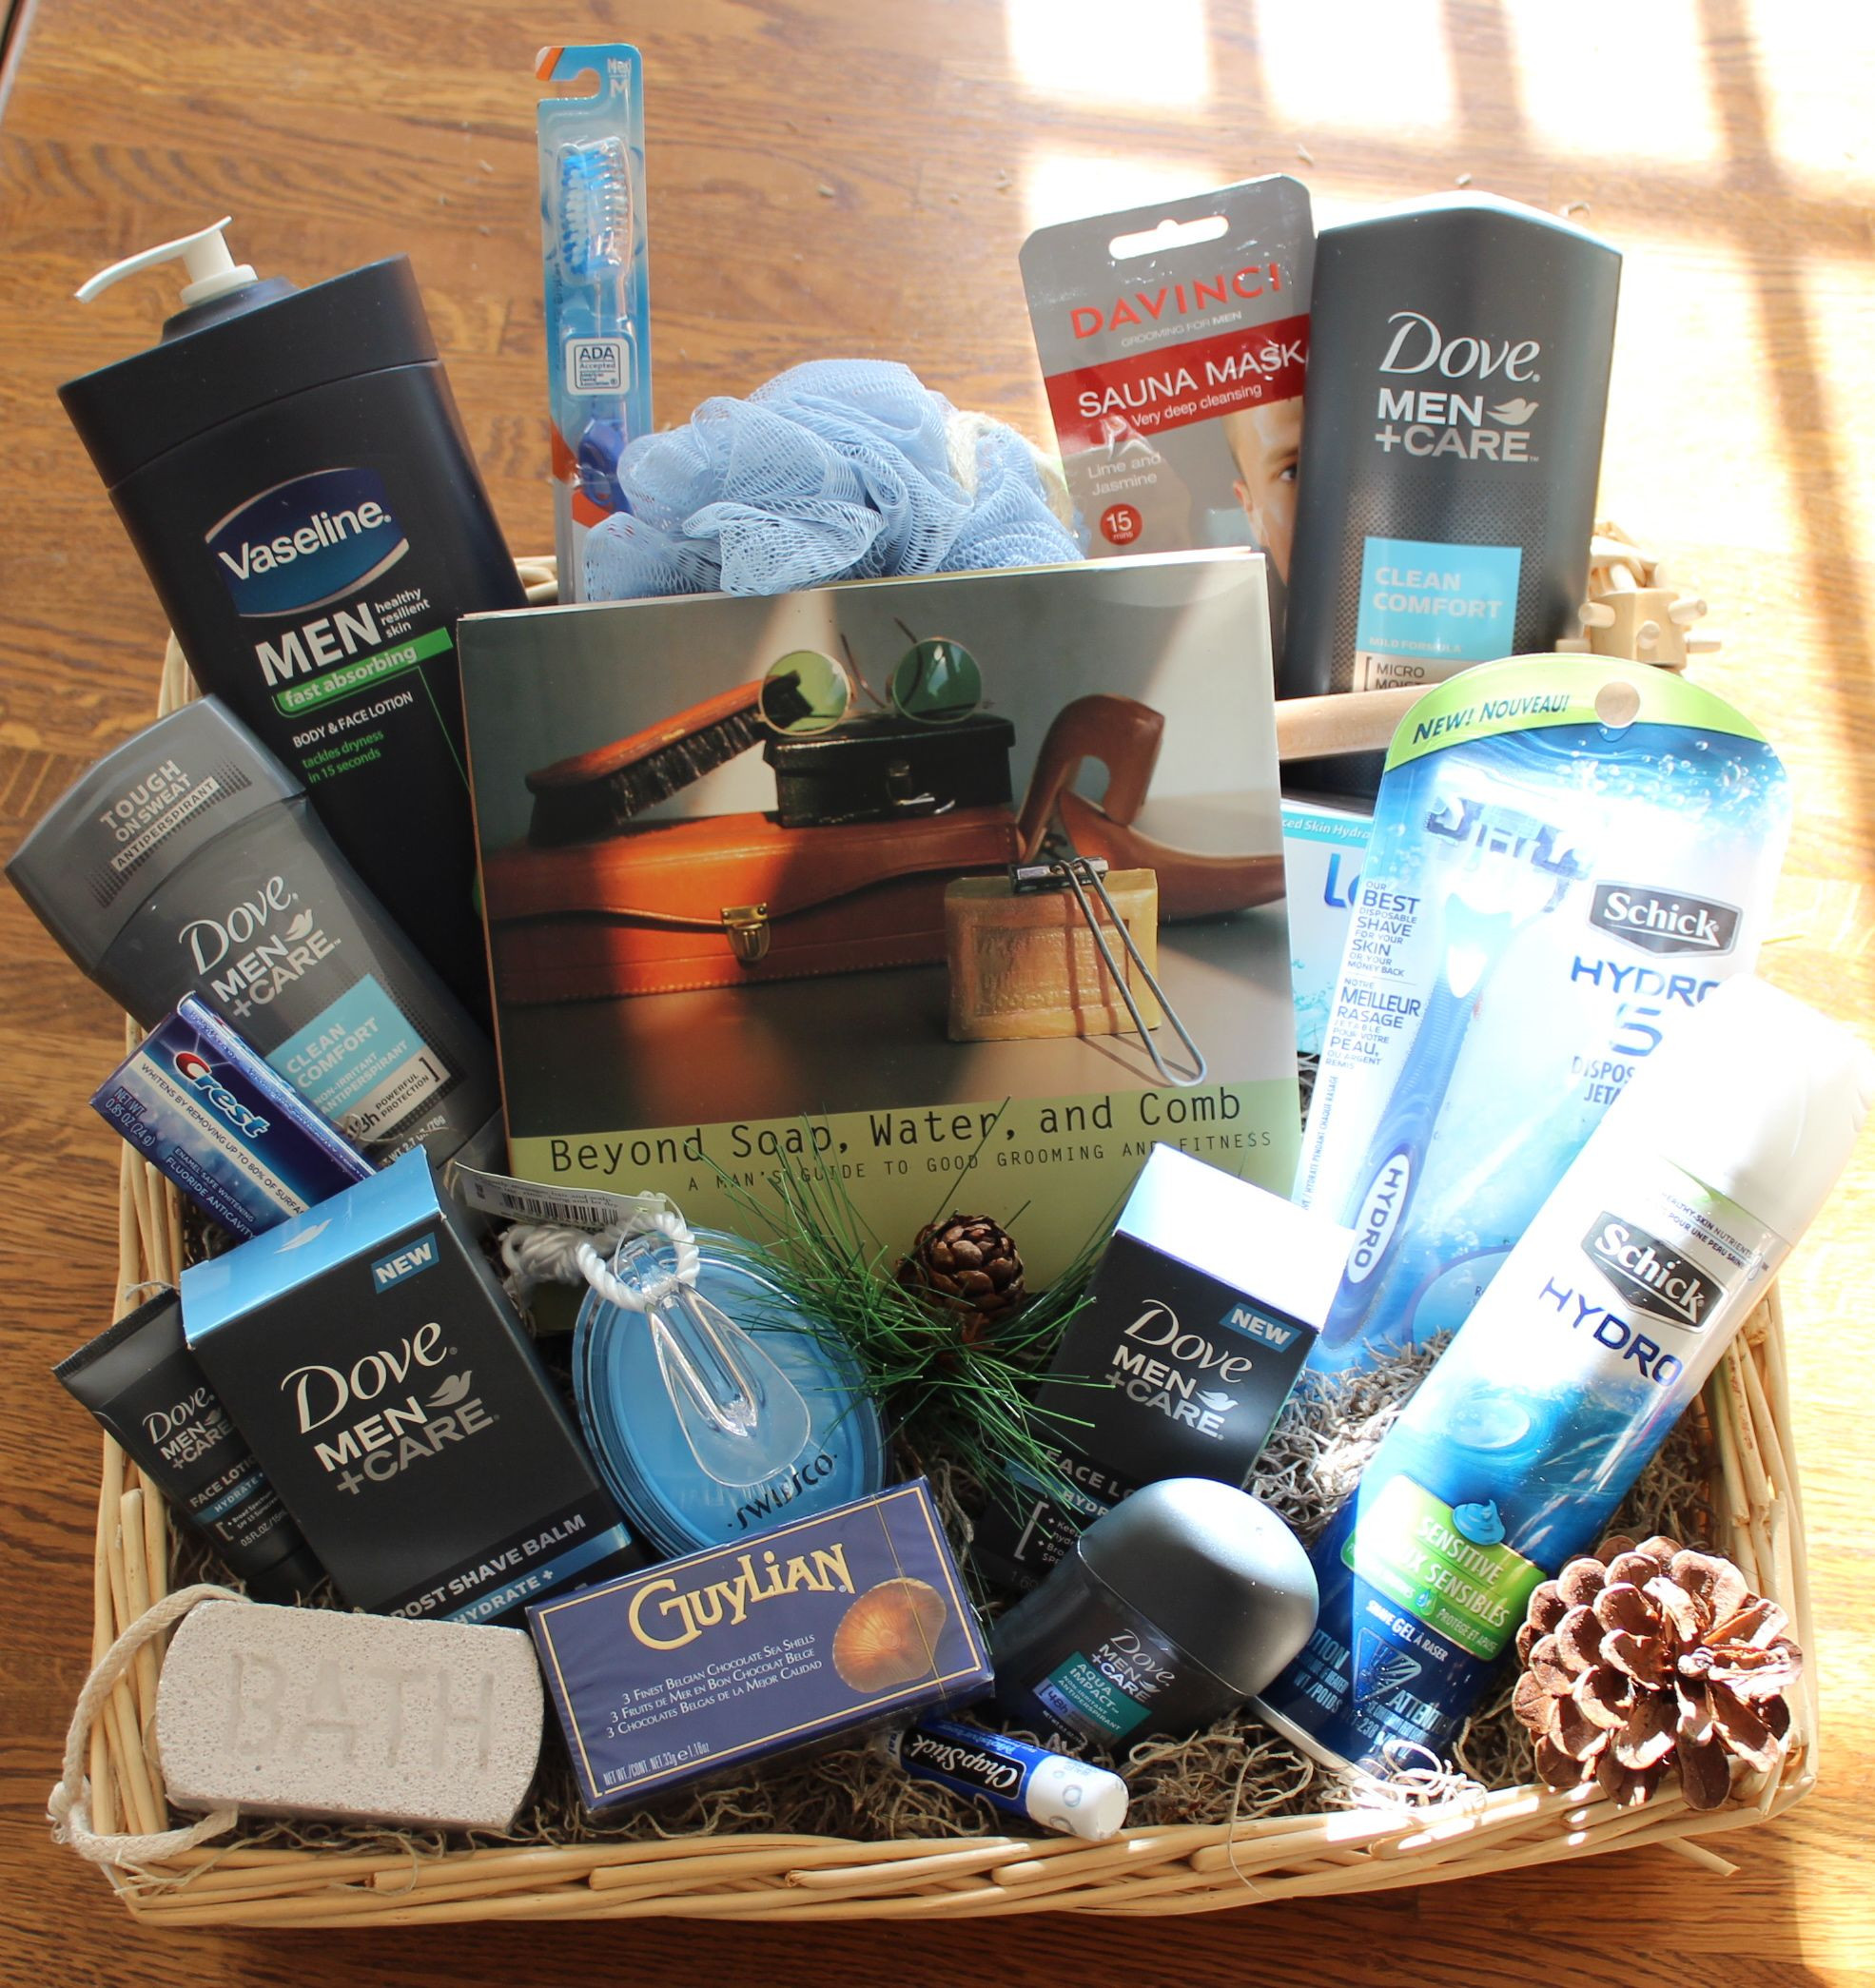 Diy Fathers Day Gift Basket
 Men s grooming spa Fathers Day basket before cellophane